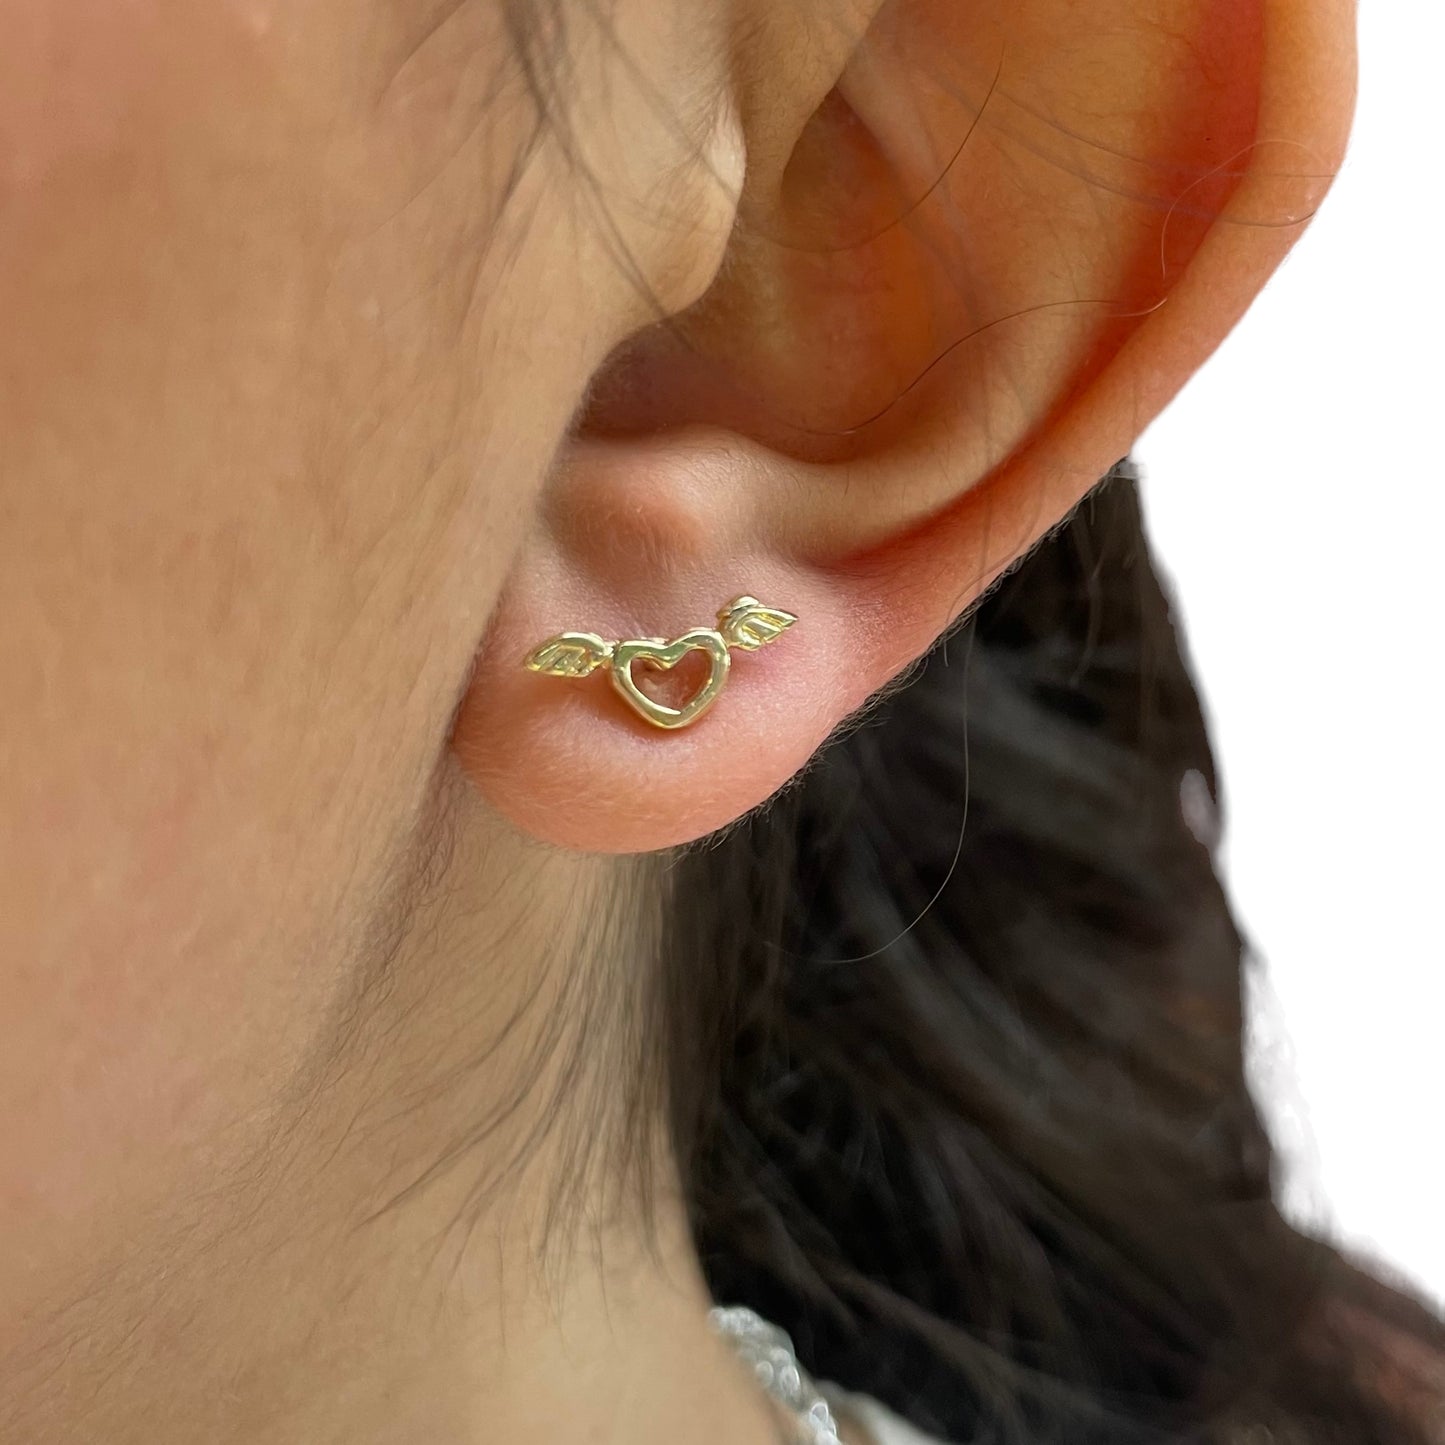 Stud earring with flying heart